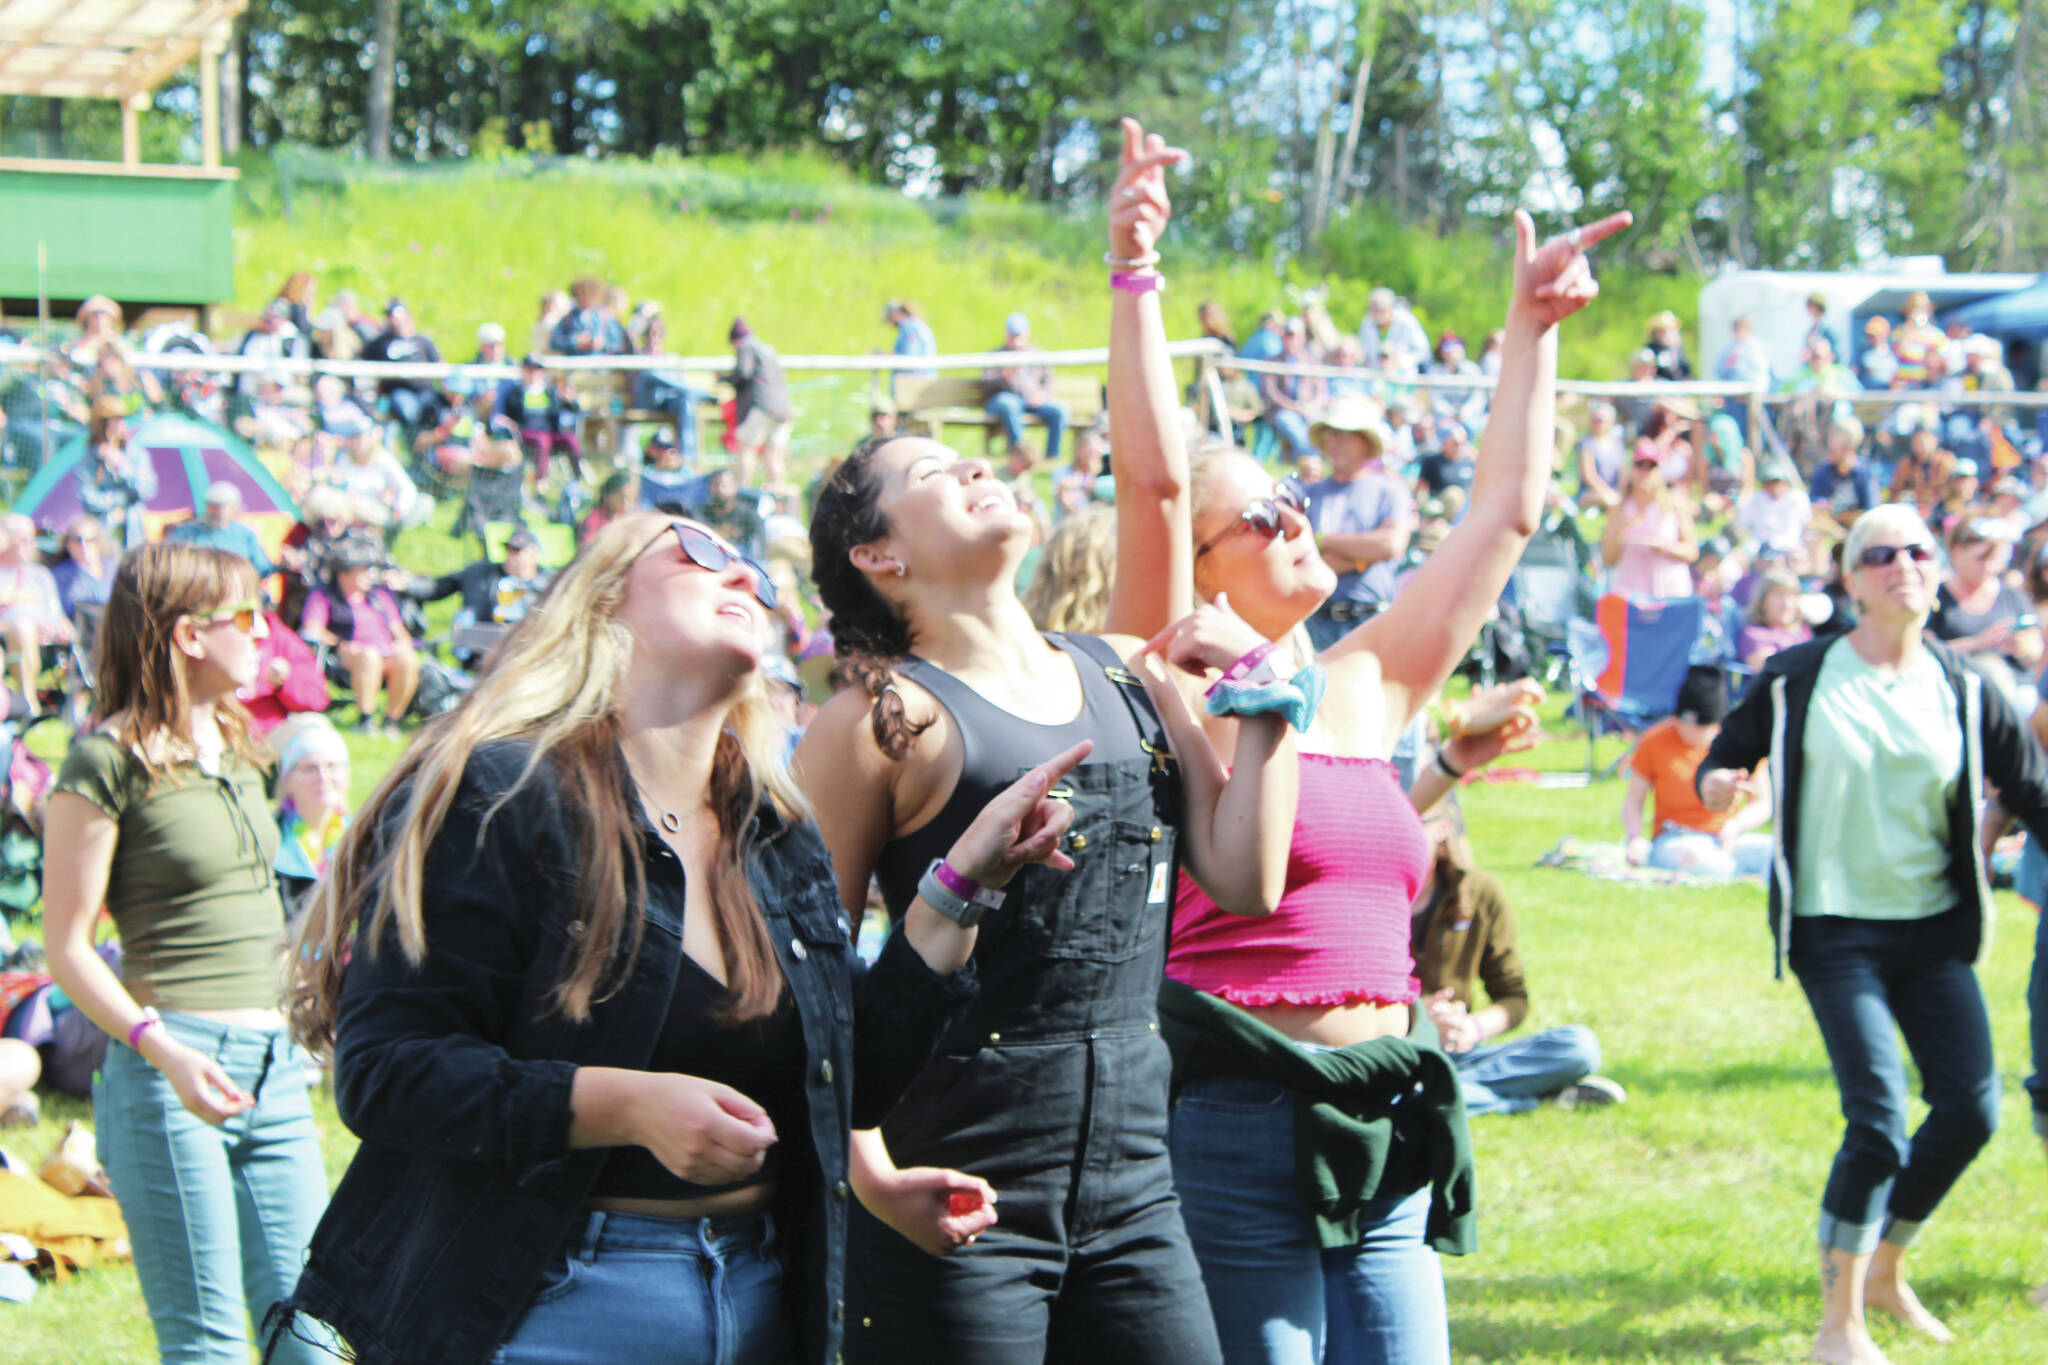 People gather in Ninilchik on Friday, Aug. 5 for Salmonfest, an annual event that raises awareness about salmon-related causes. (Camille Botello/Peninsula Clarion)